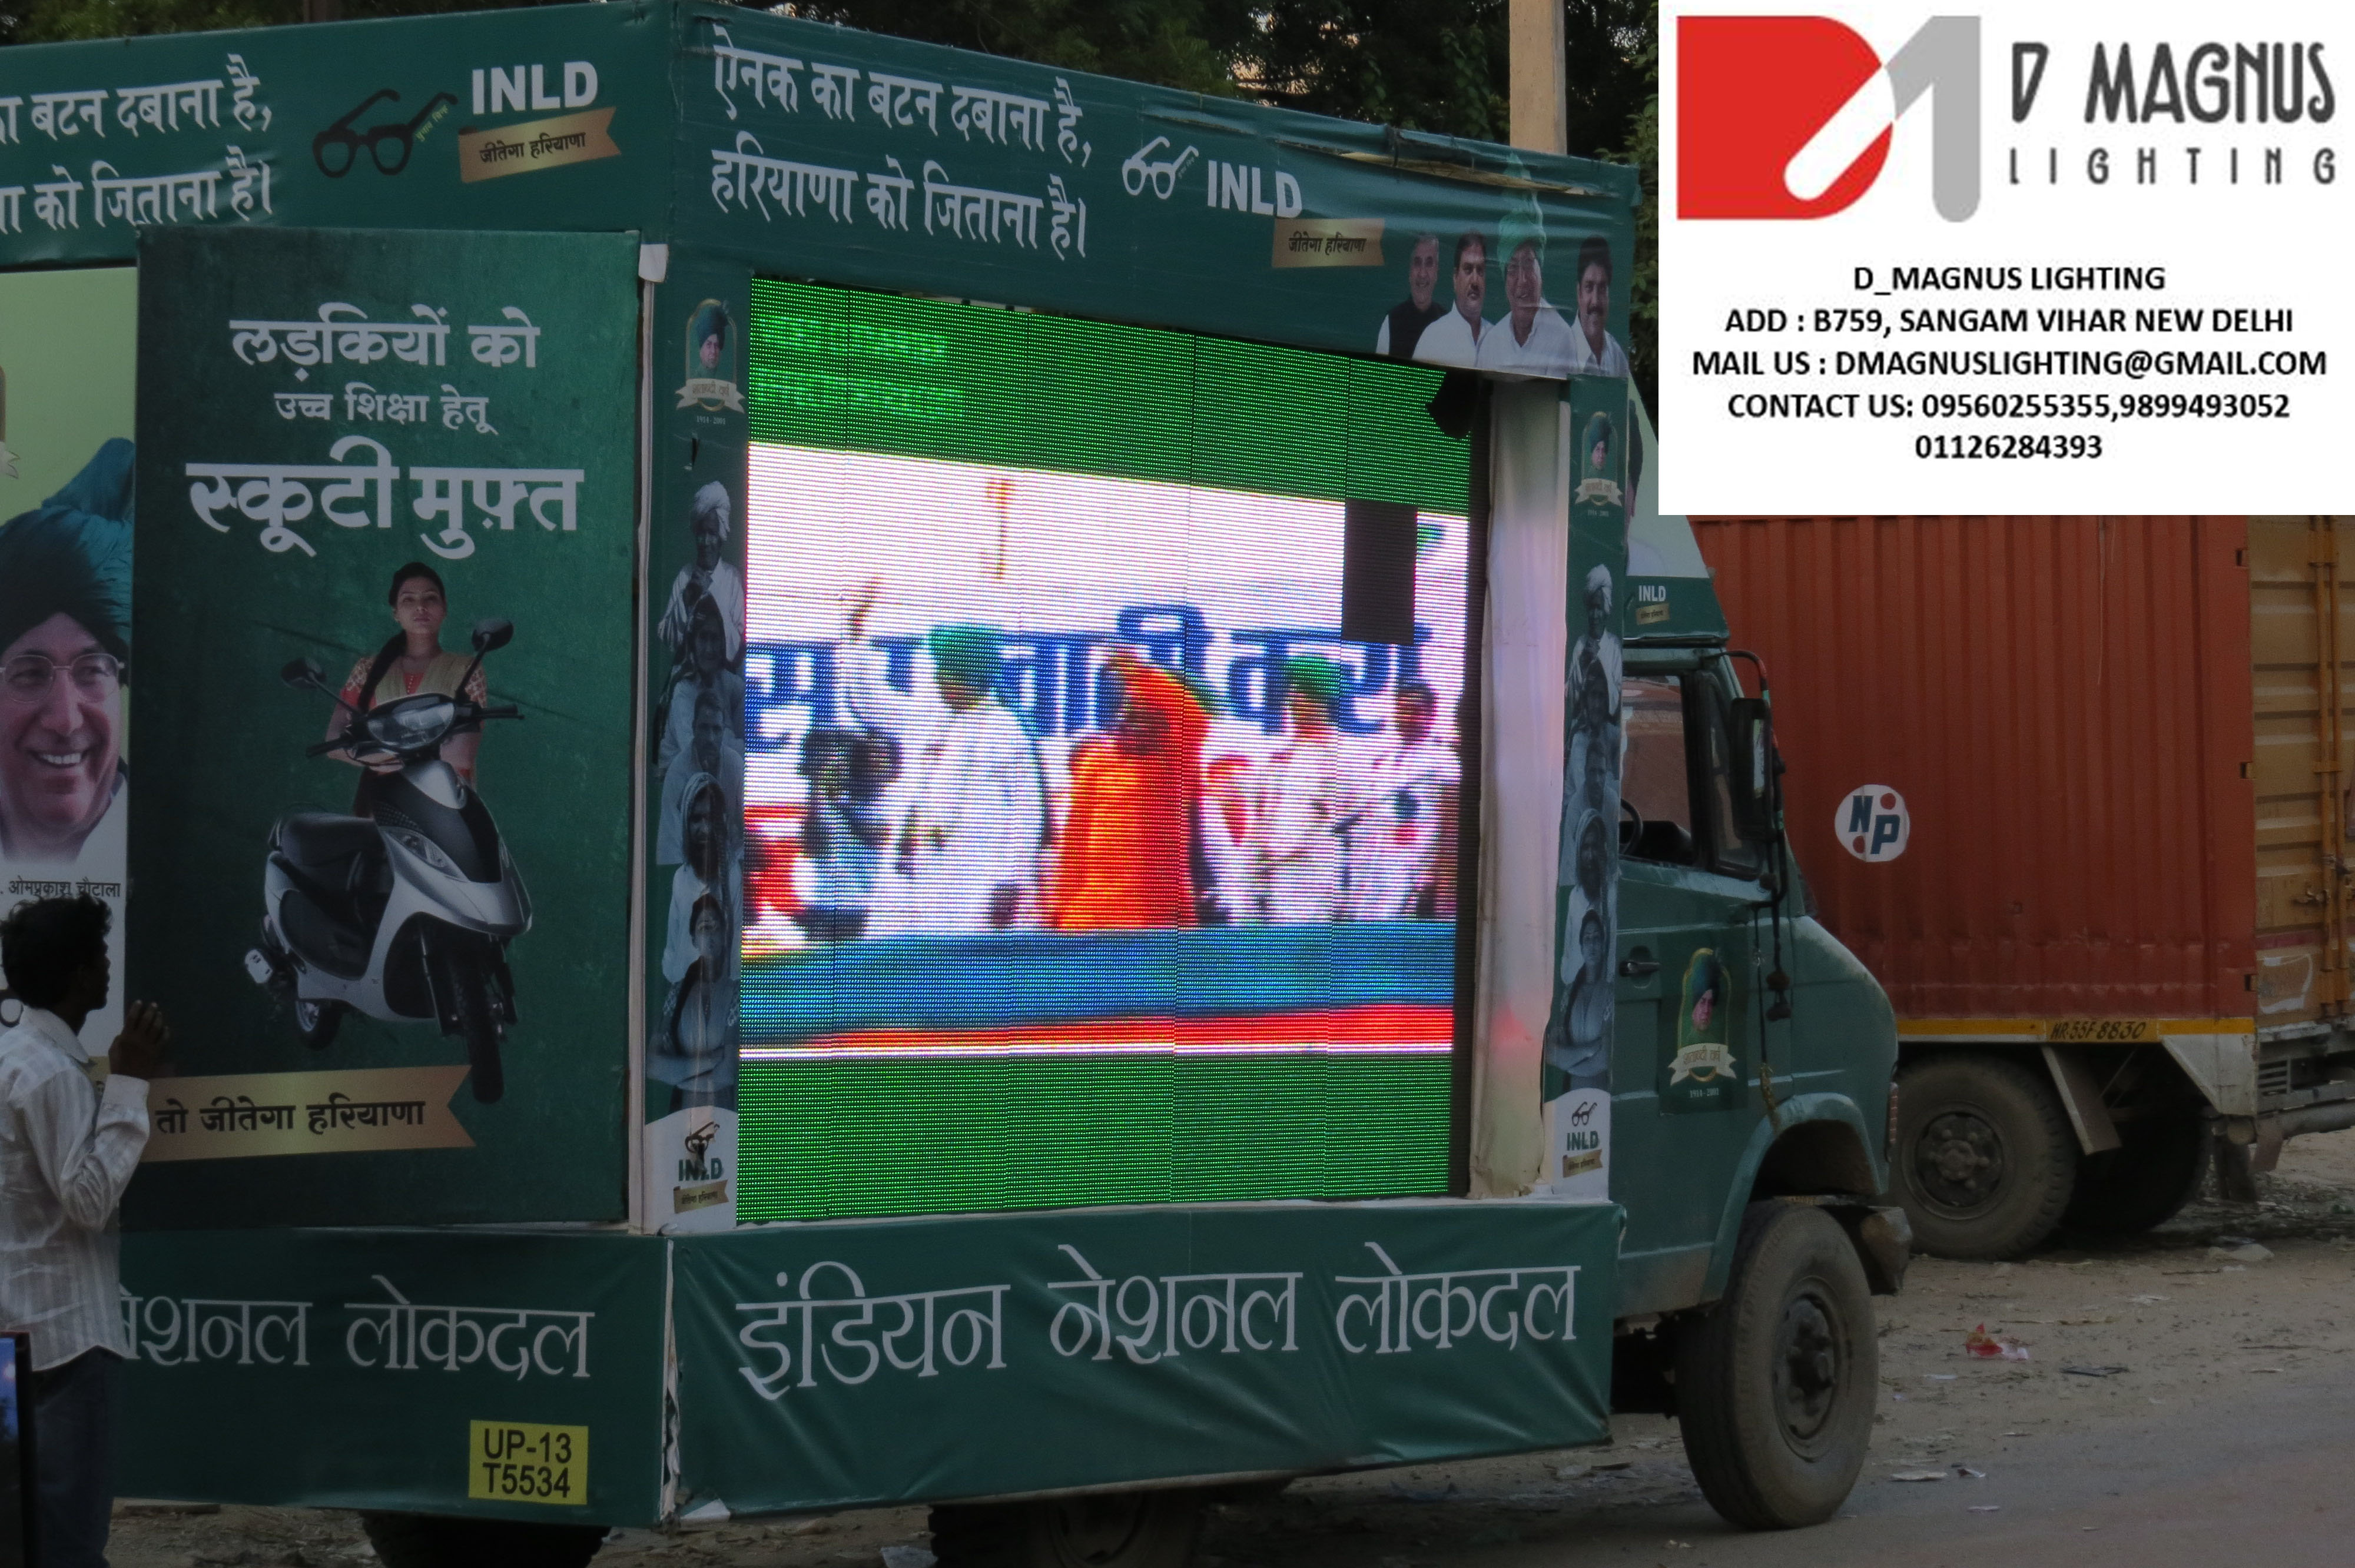 LED video van on rental in GujaratEventsExhibitions - Trade FairsSouth DelhiEast of Kailash